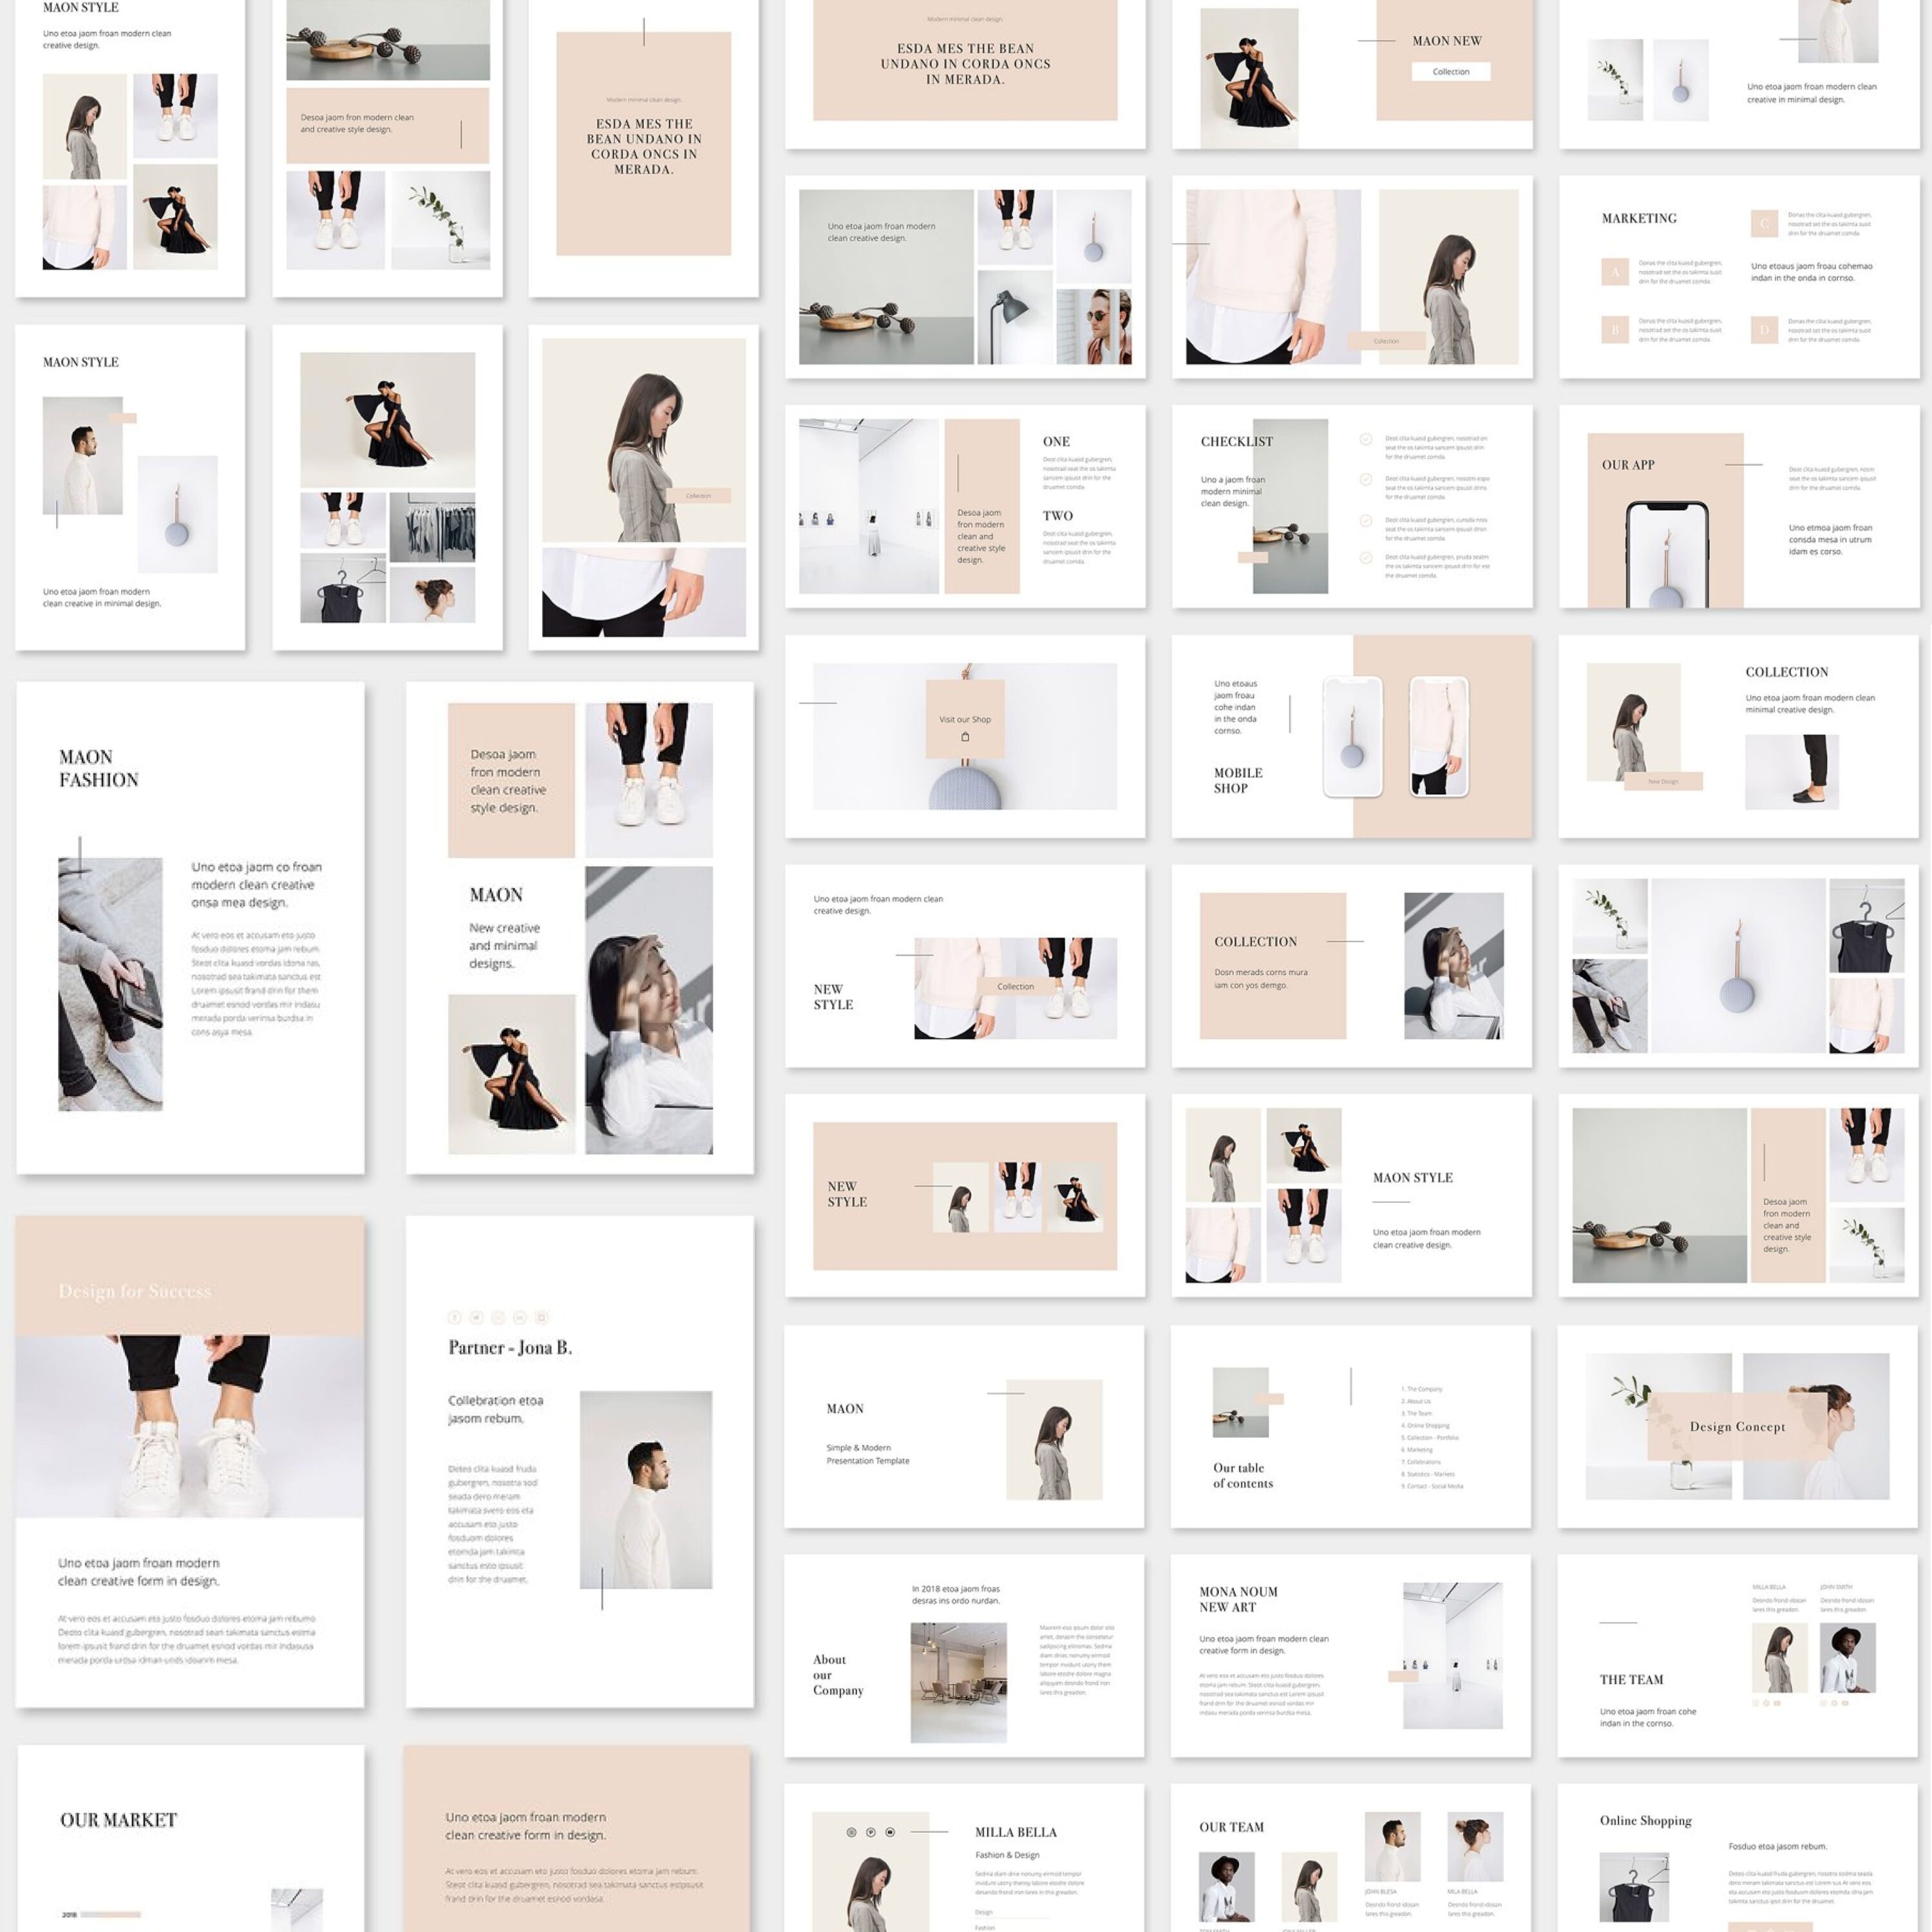 MAON - Vertical Powerpoint Template cover.